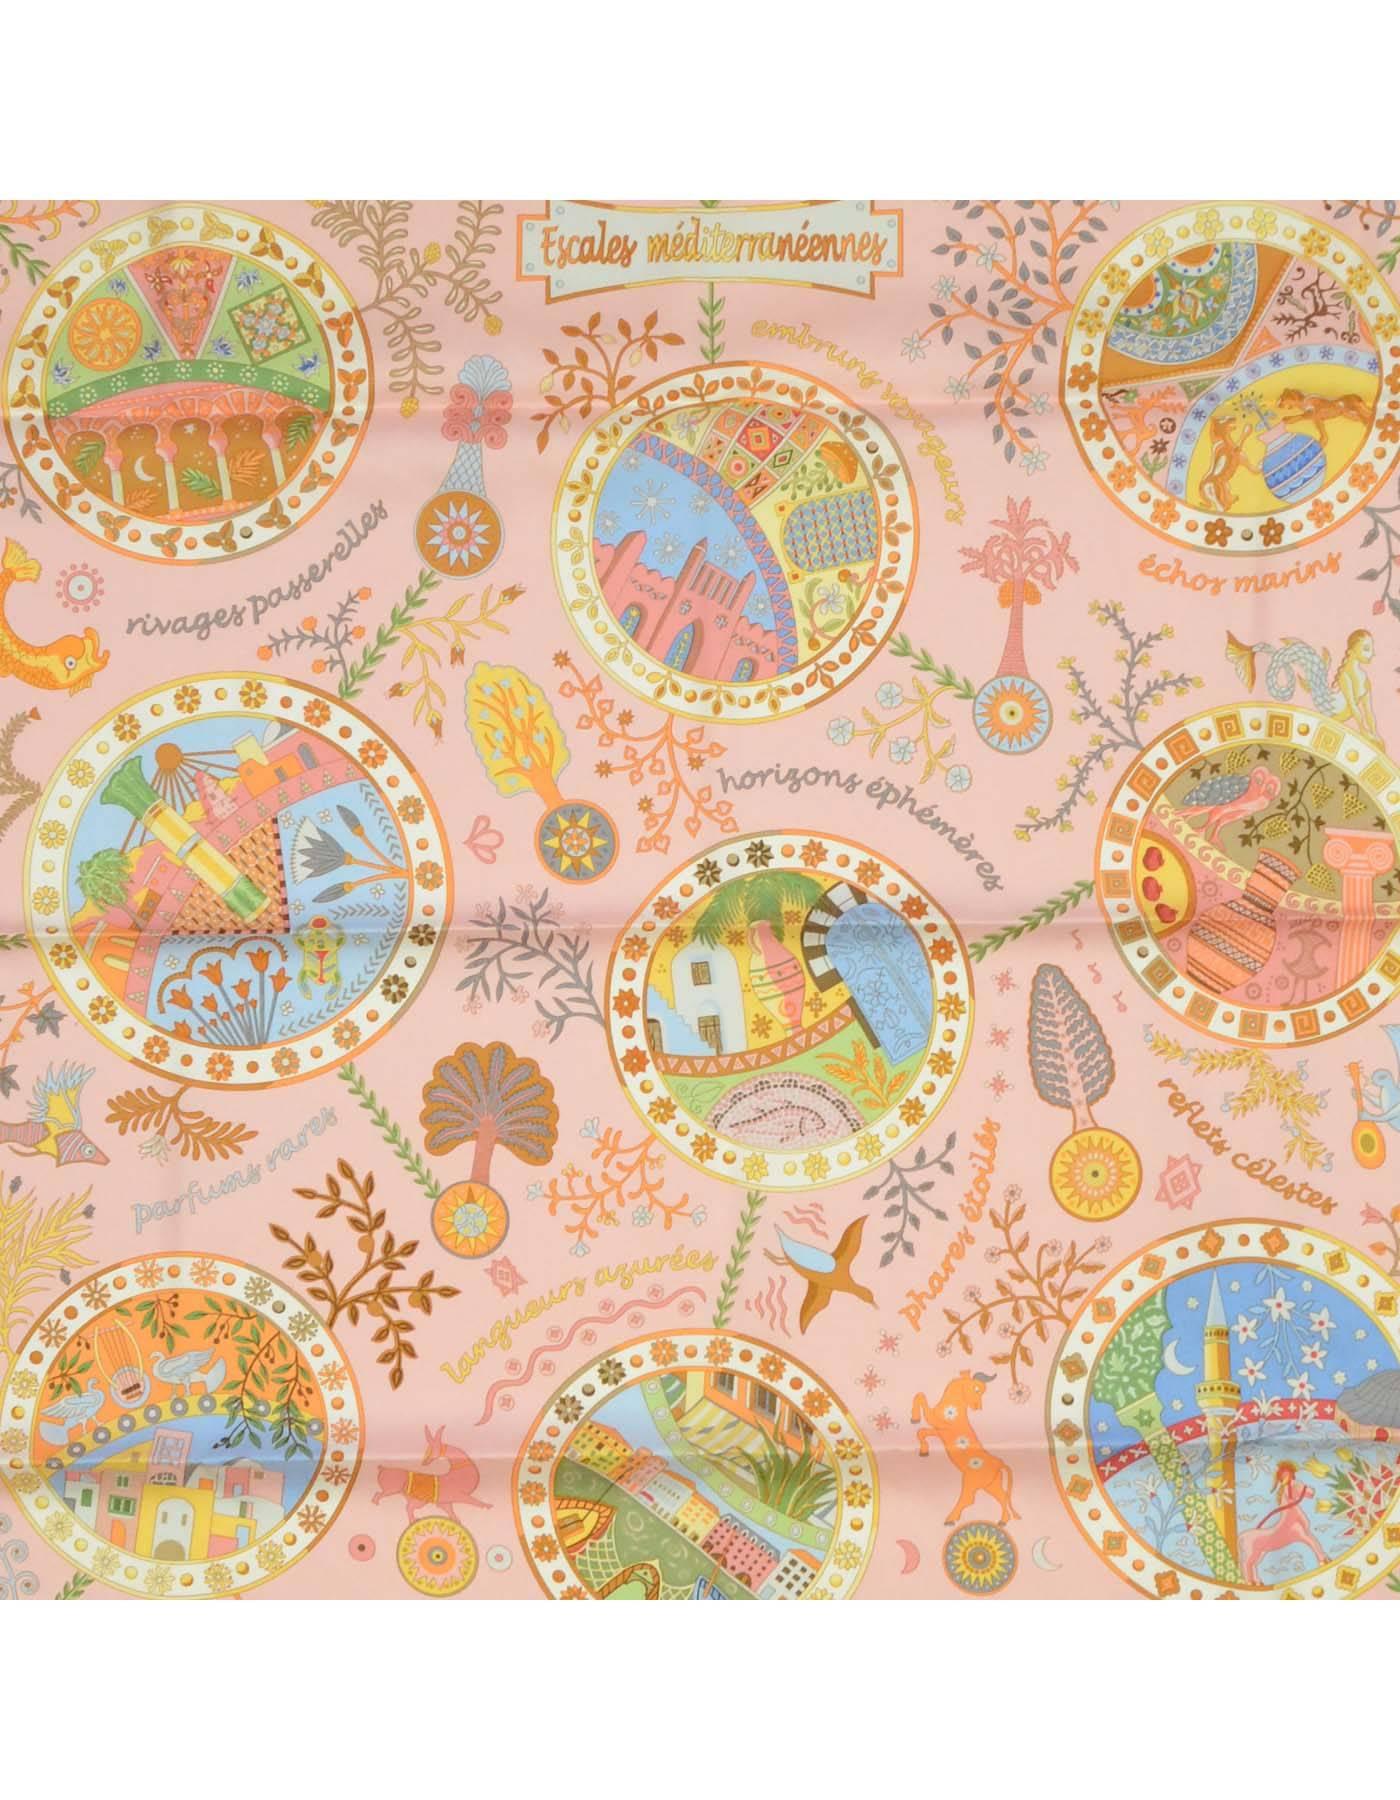 Hermes Pink Silk Escales Mediterraneennes 90cm Scarf
Features circular pattern throughout with fish motif around border

Made in: France
Color: Pink
Composition: 100% Silk
Overall Condition: Excellent pre-owned